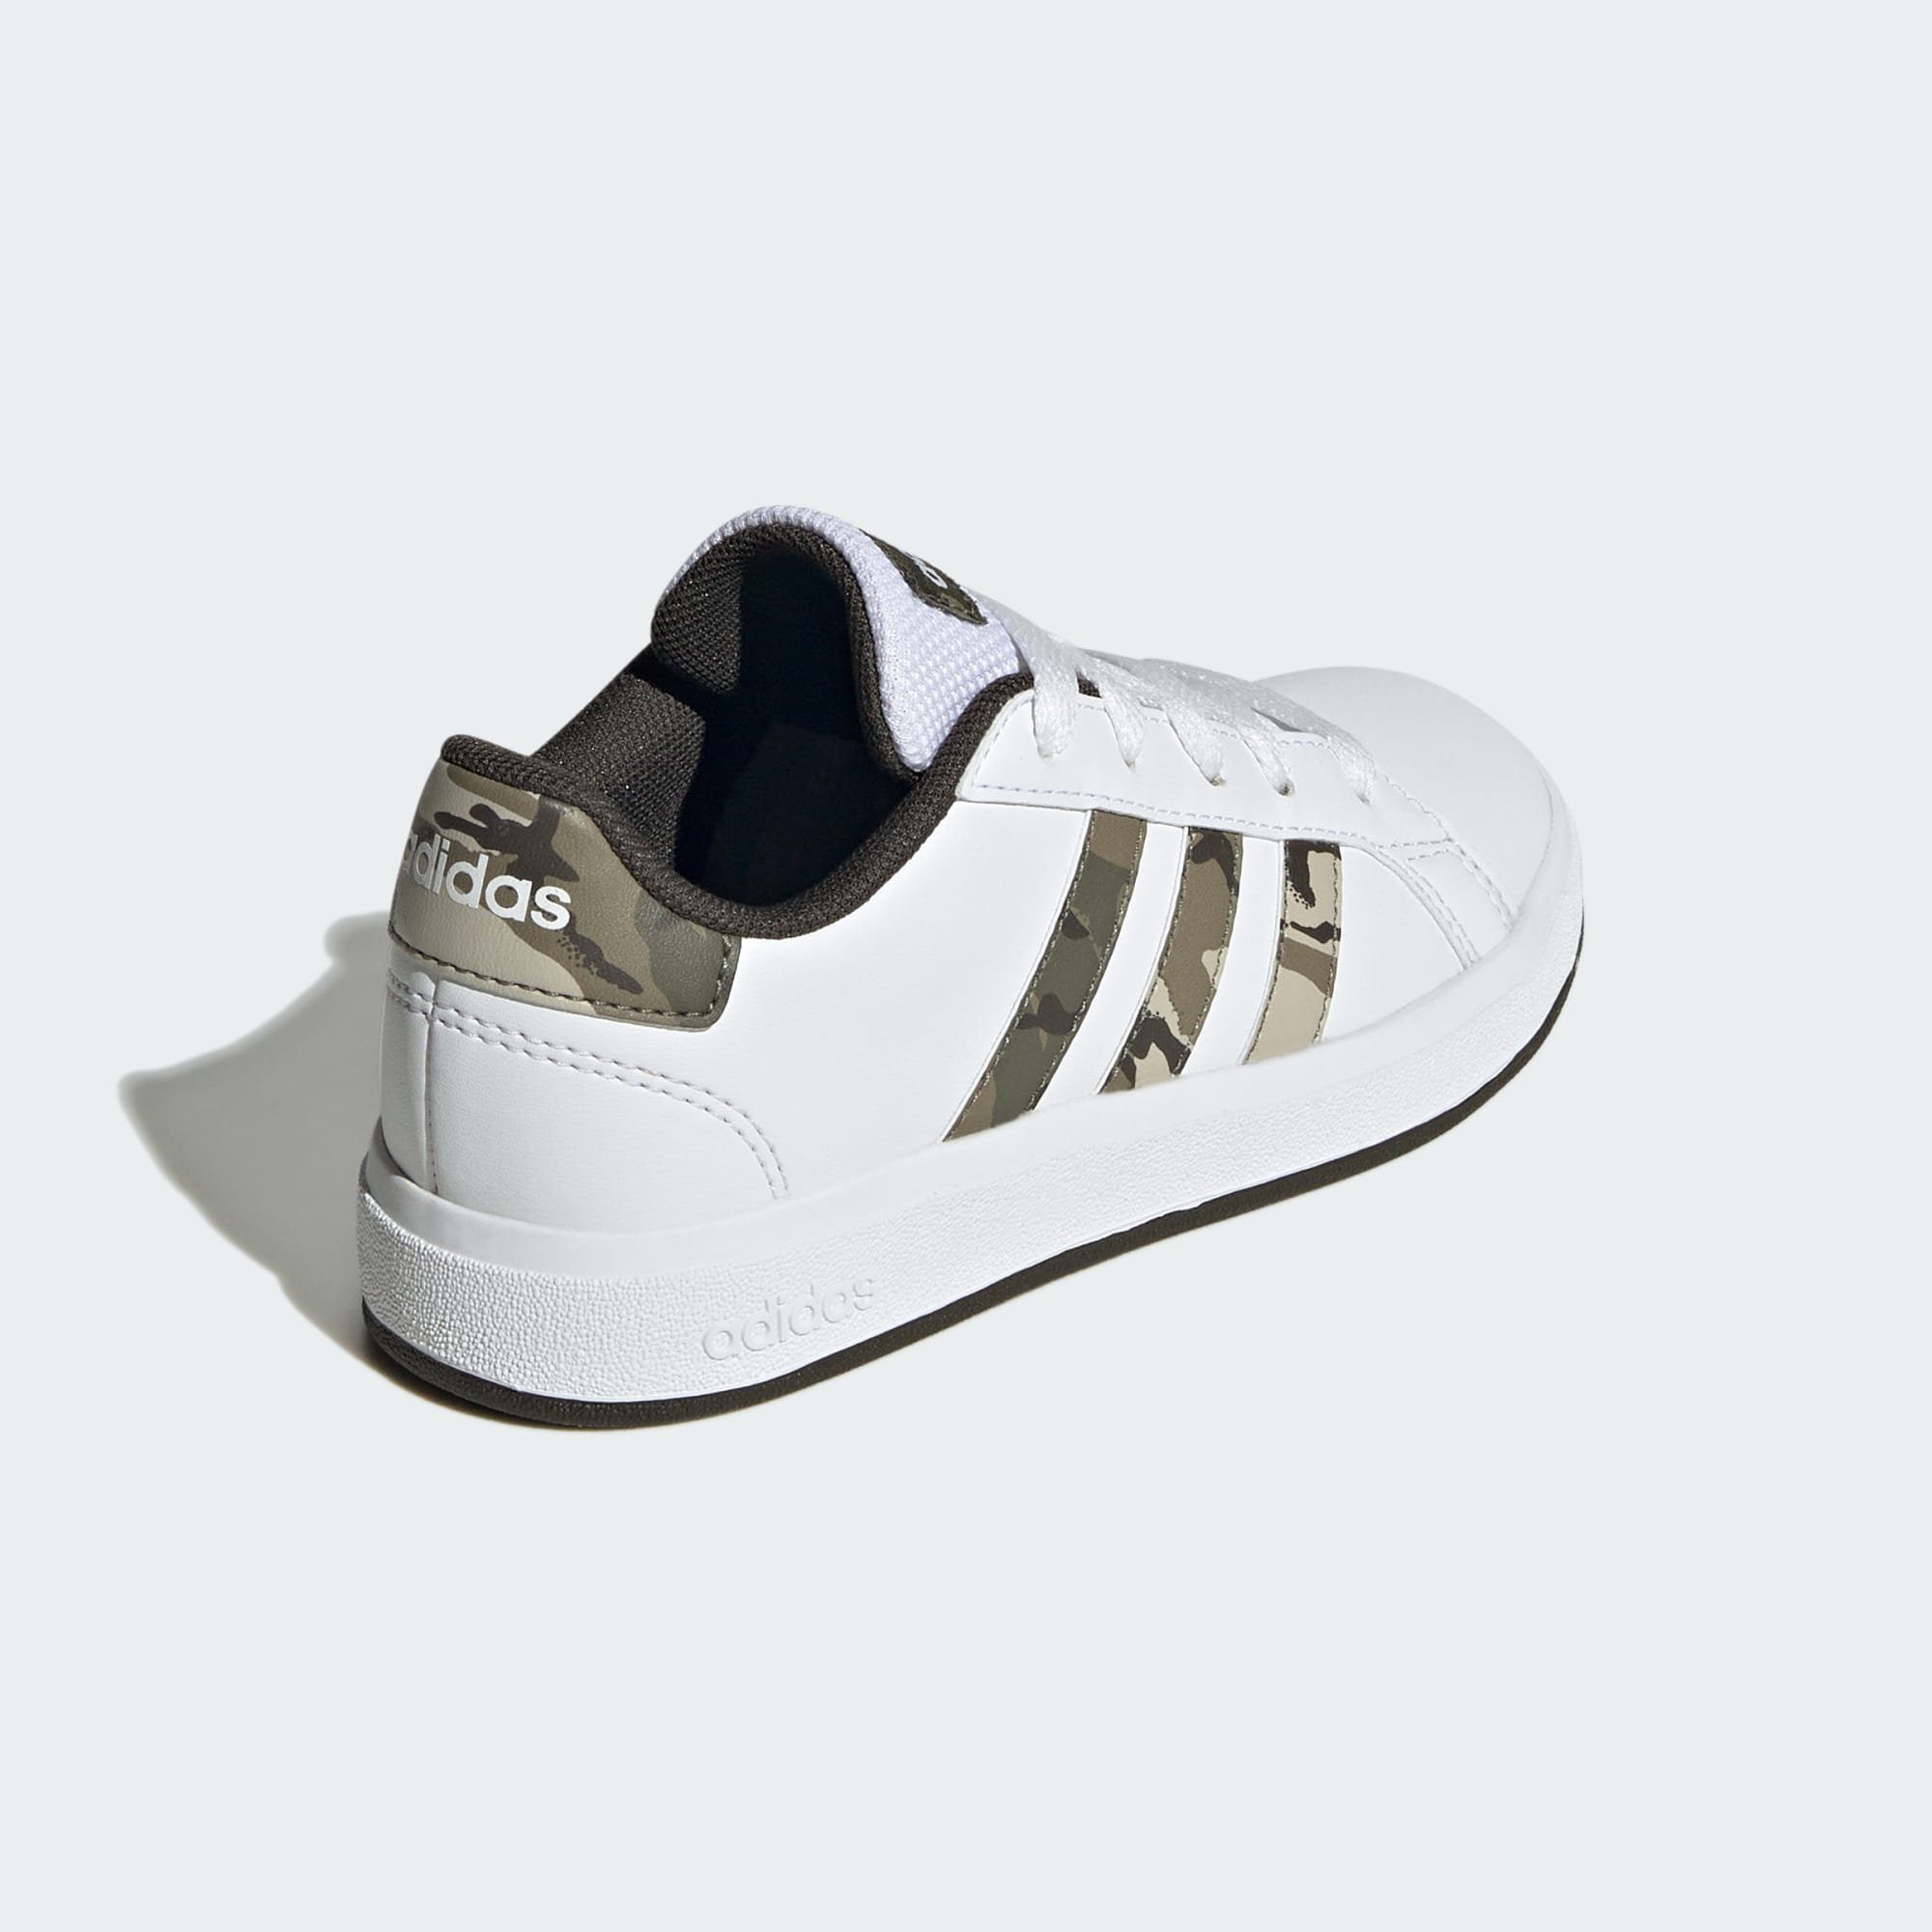 Strata / SHOES Cloud COURT Olive / Sneaker adidas 2.0 GRAND White Olive Sportswear Shadow KIDS